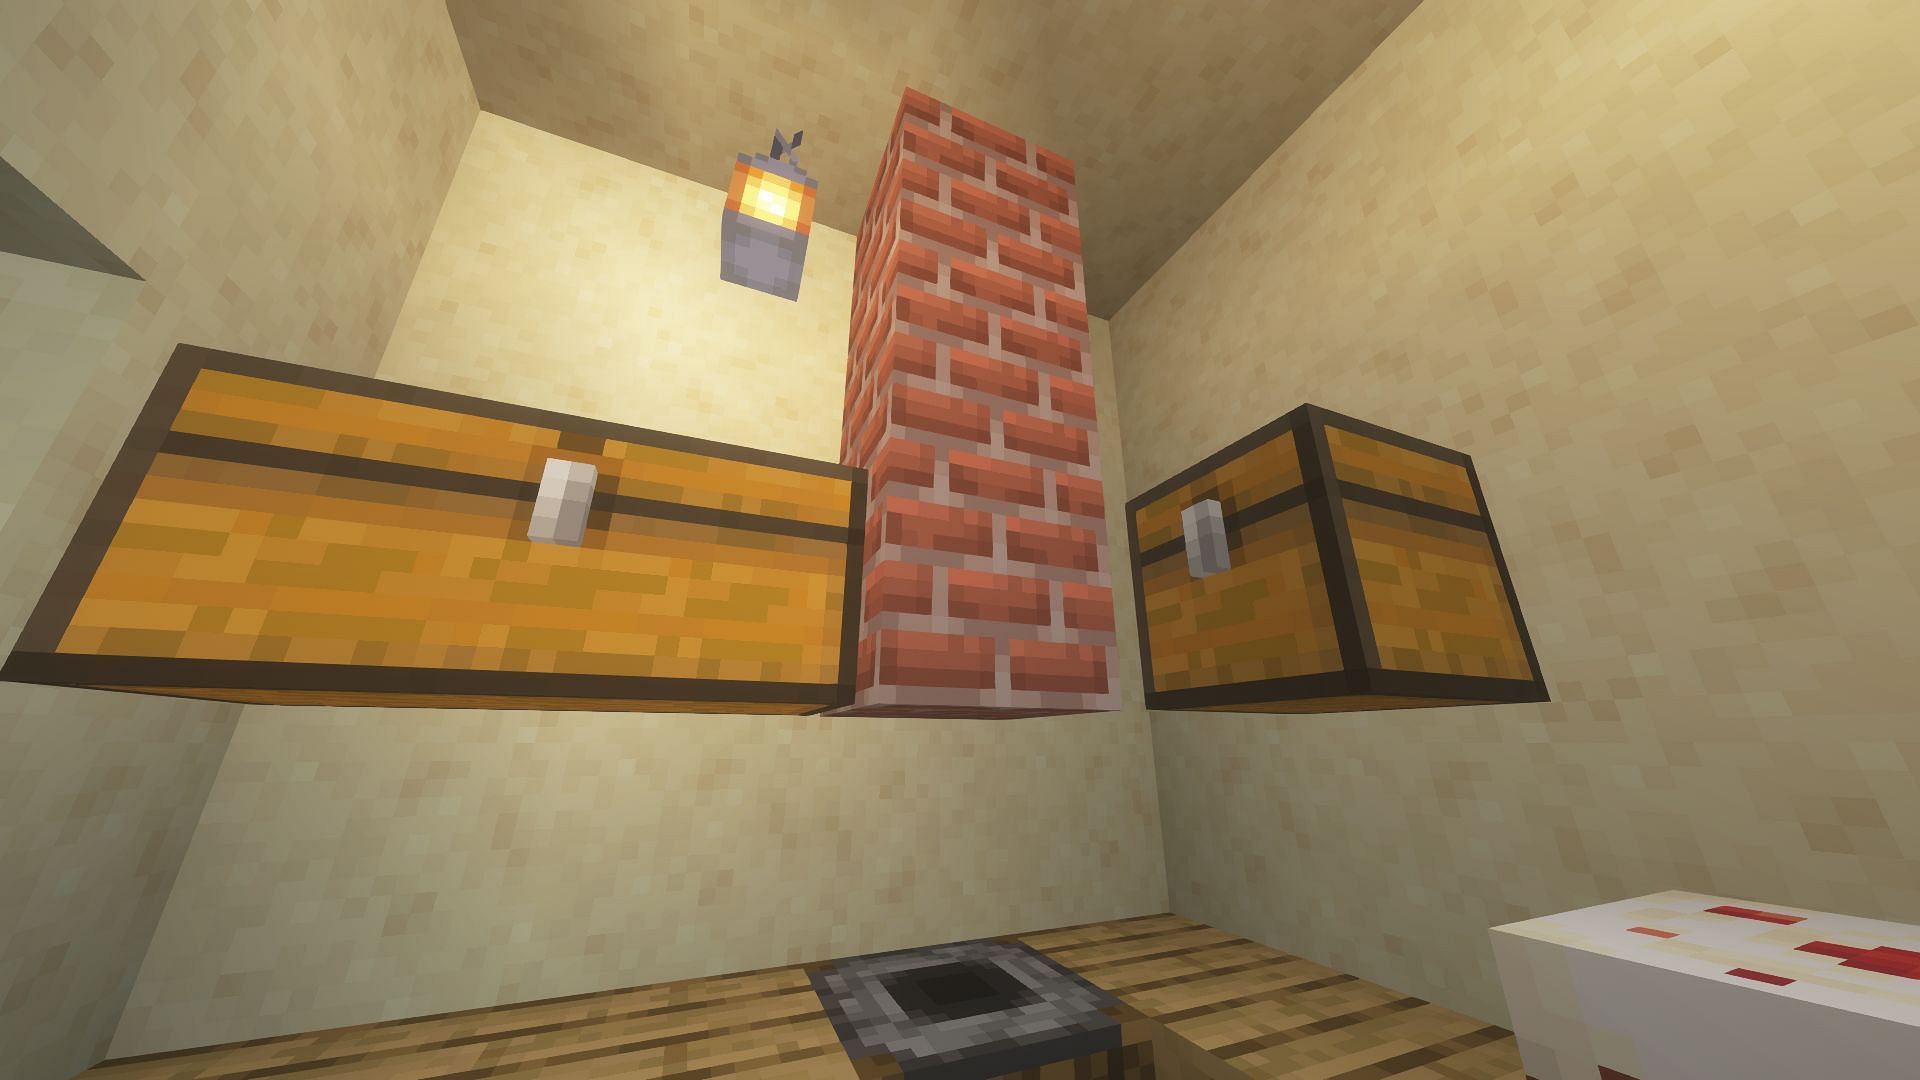 Chests on the wall for food items (Image via Minecraft 1.19 update)